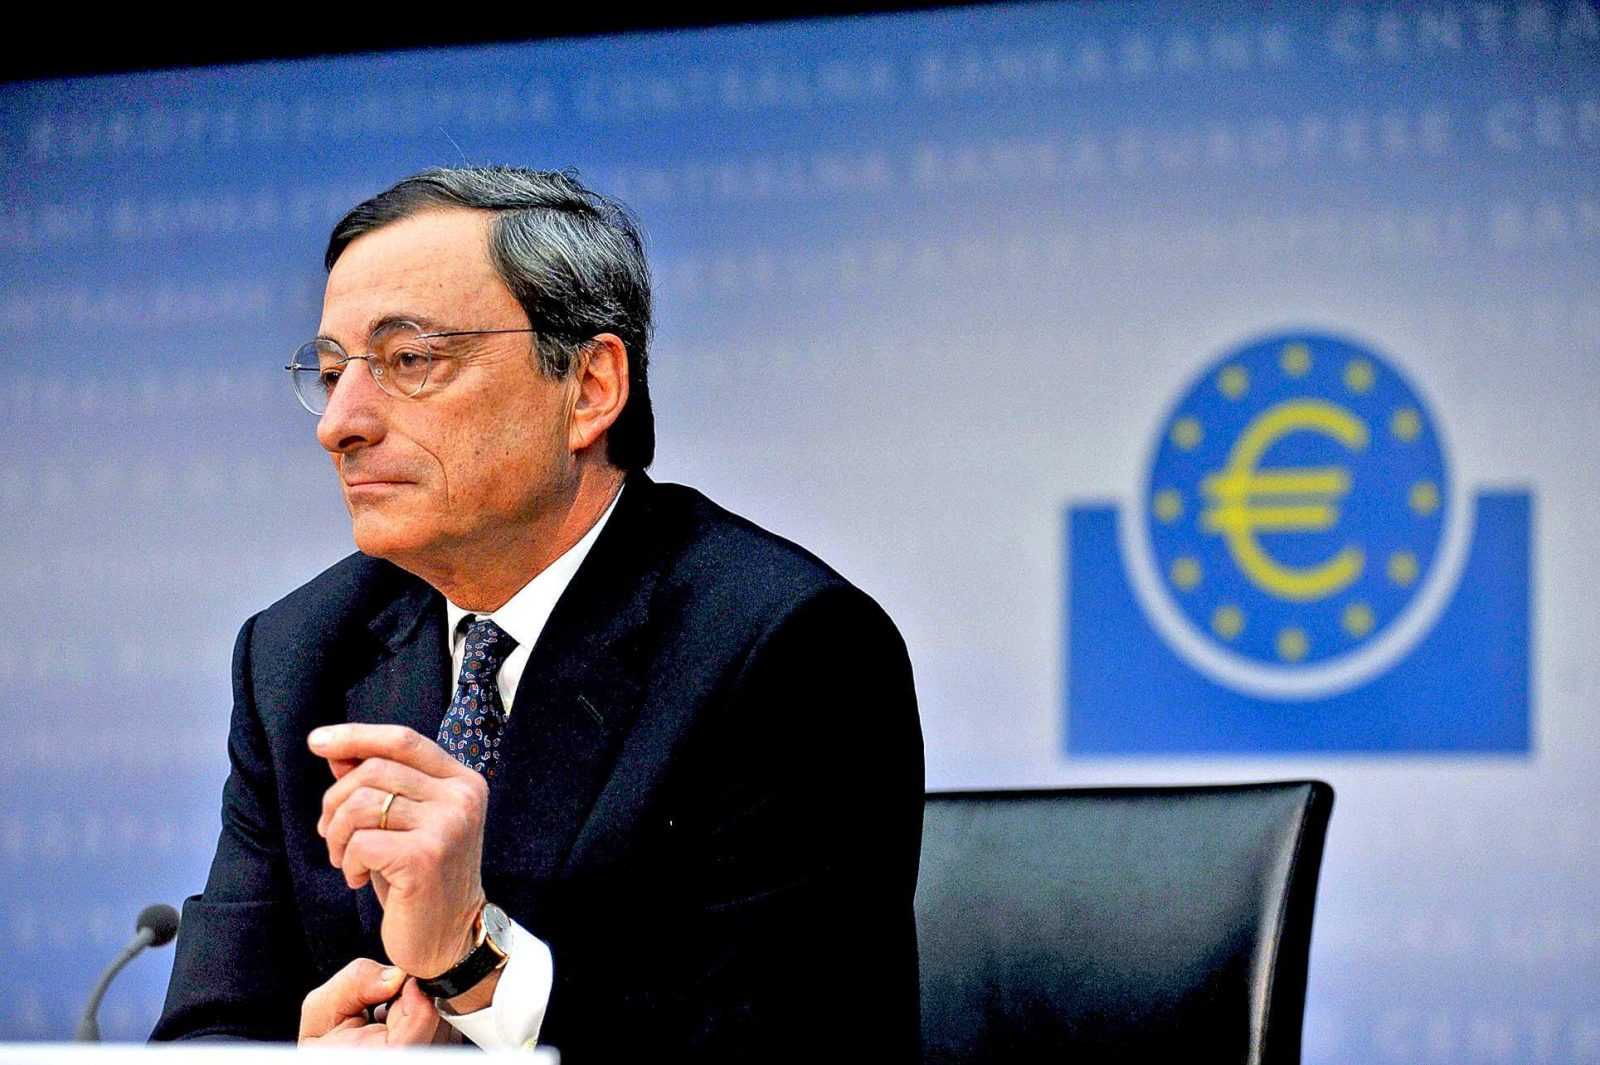 ECB.Interest Rate Policy - Market Impact